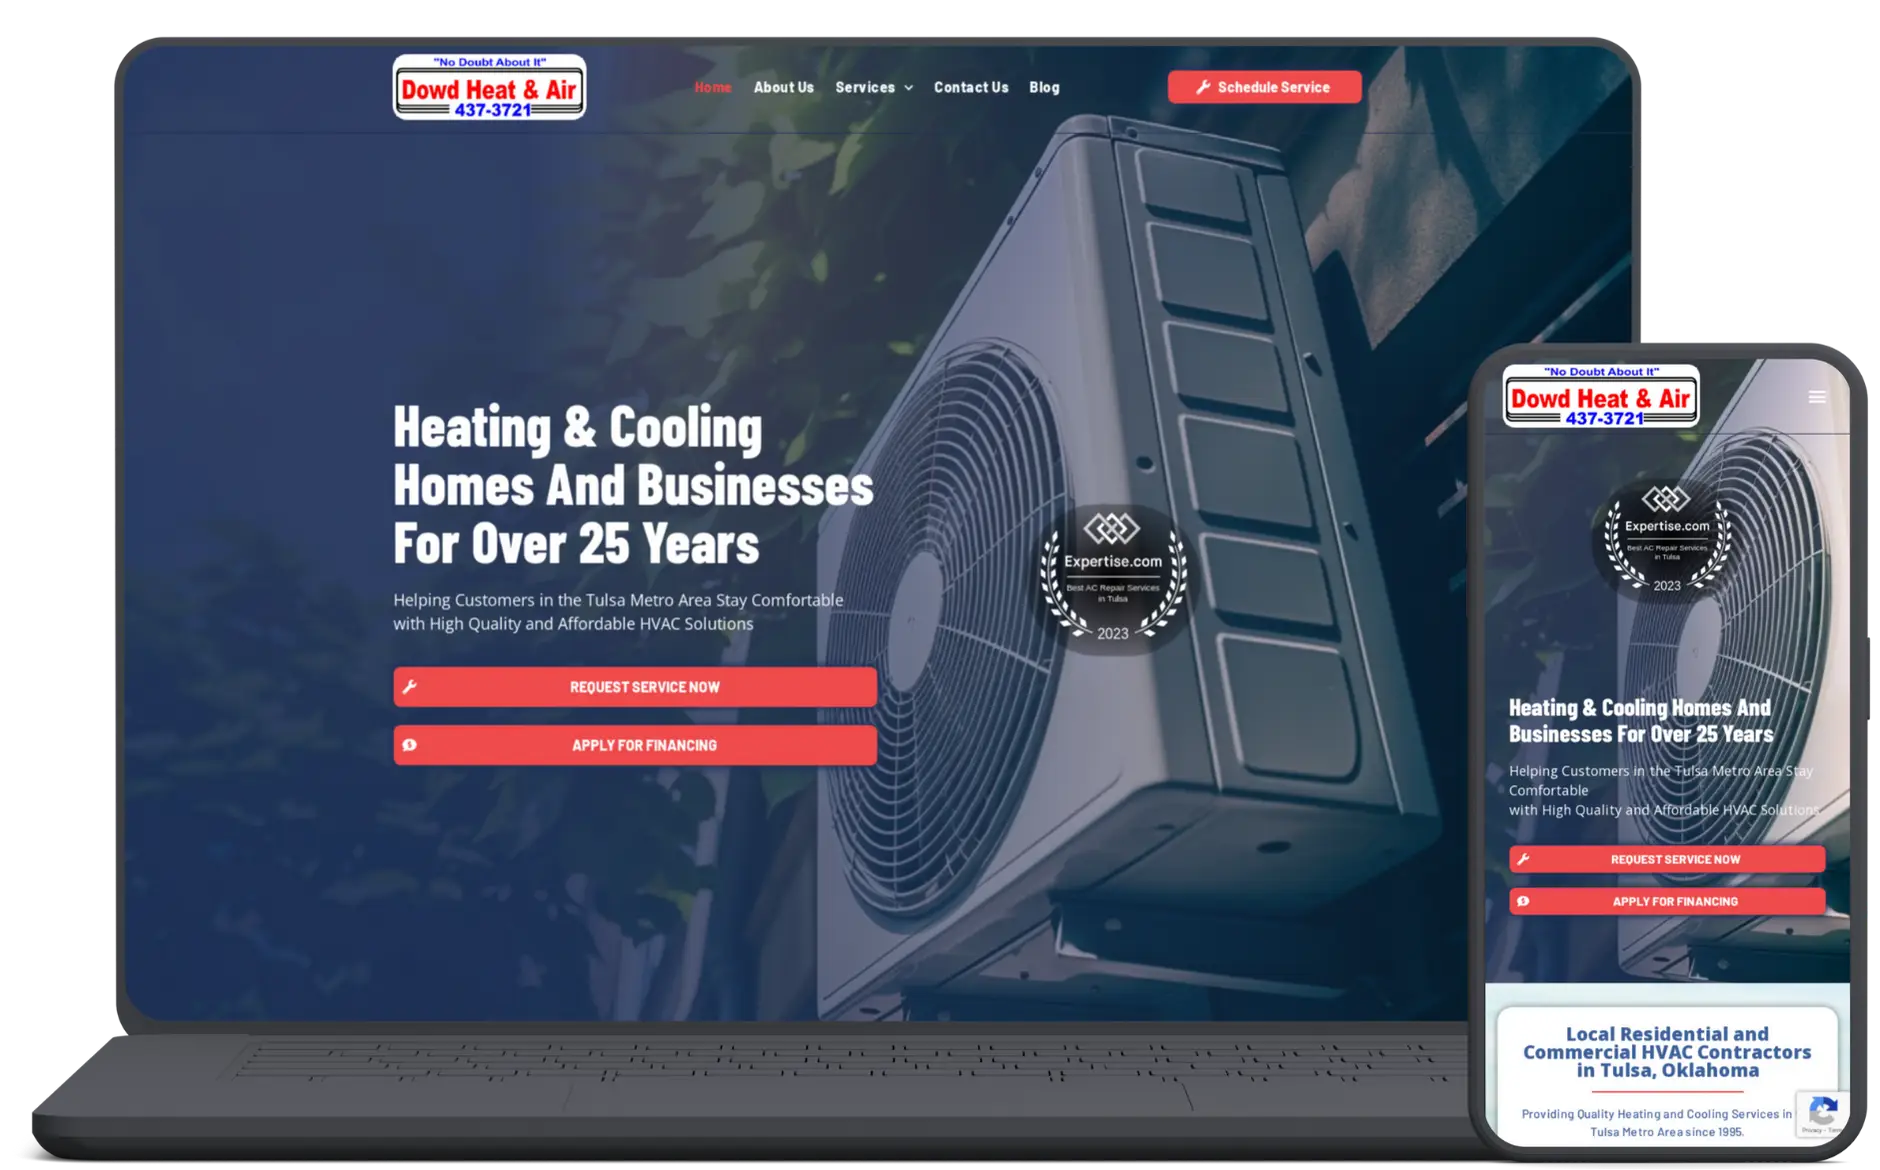 Mockup of the Dowd Heat and Air website - An HVAC company website from Digon Design